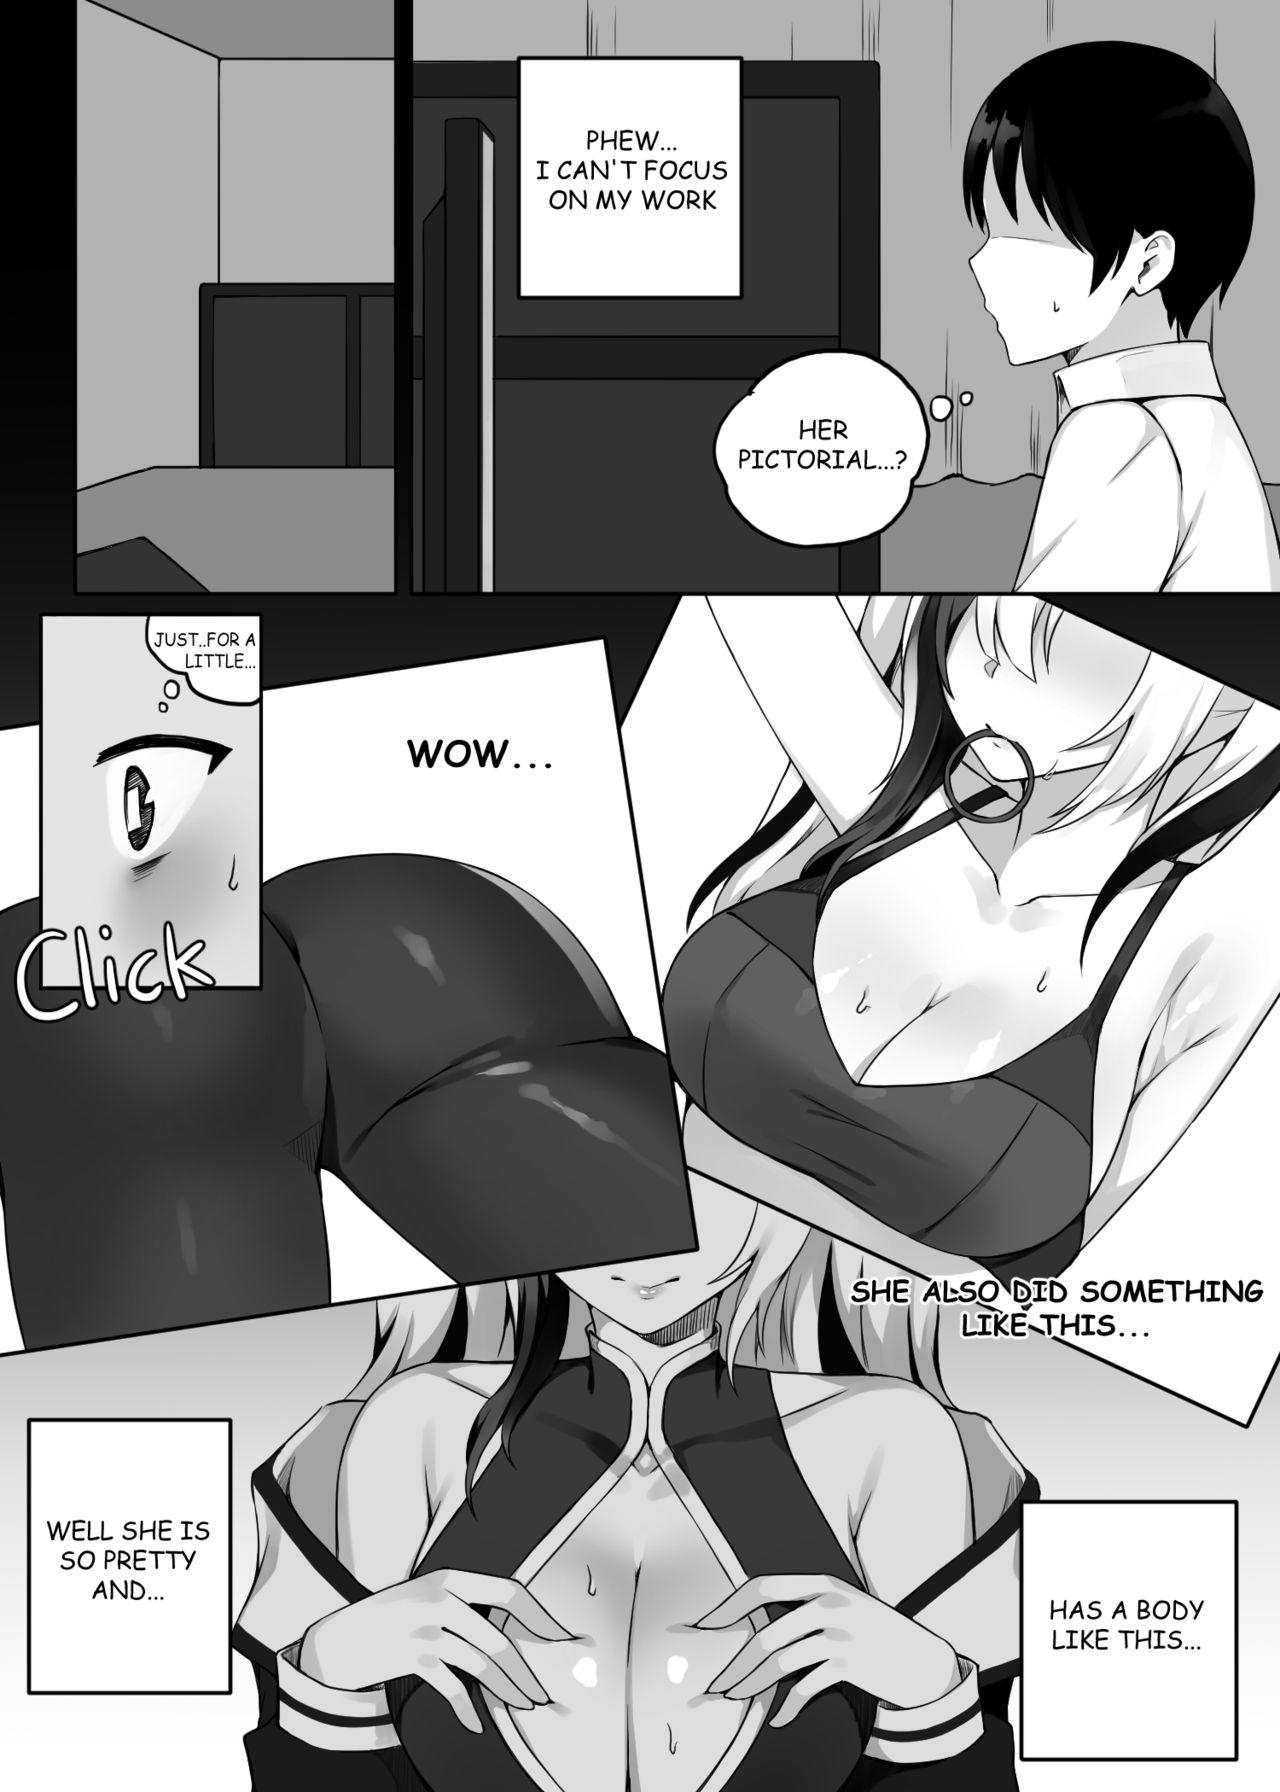 Phat FEater's fan service♥ - Arknights Home - Page 4